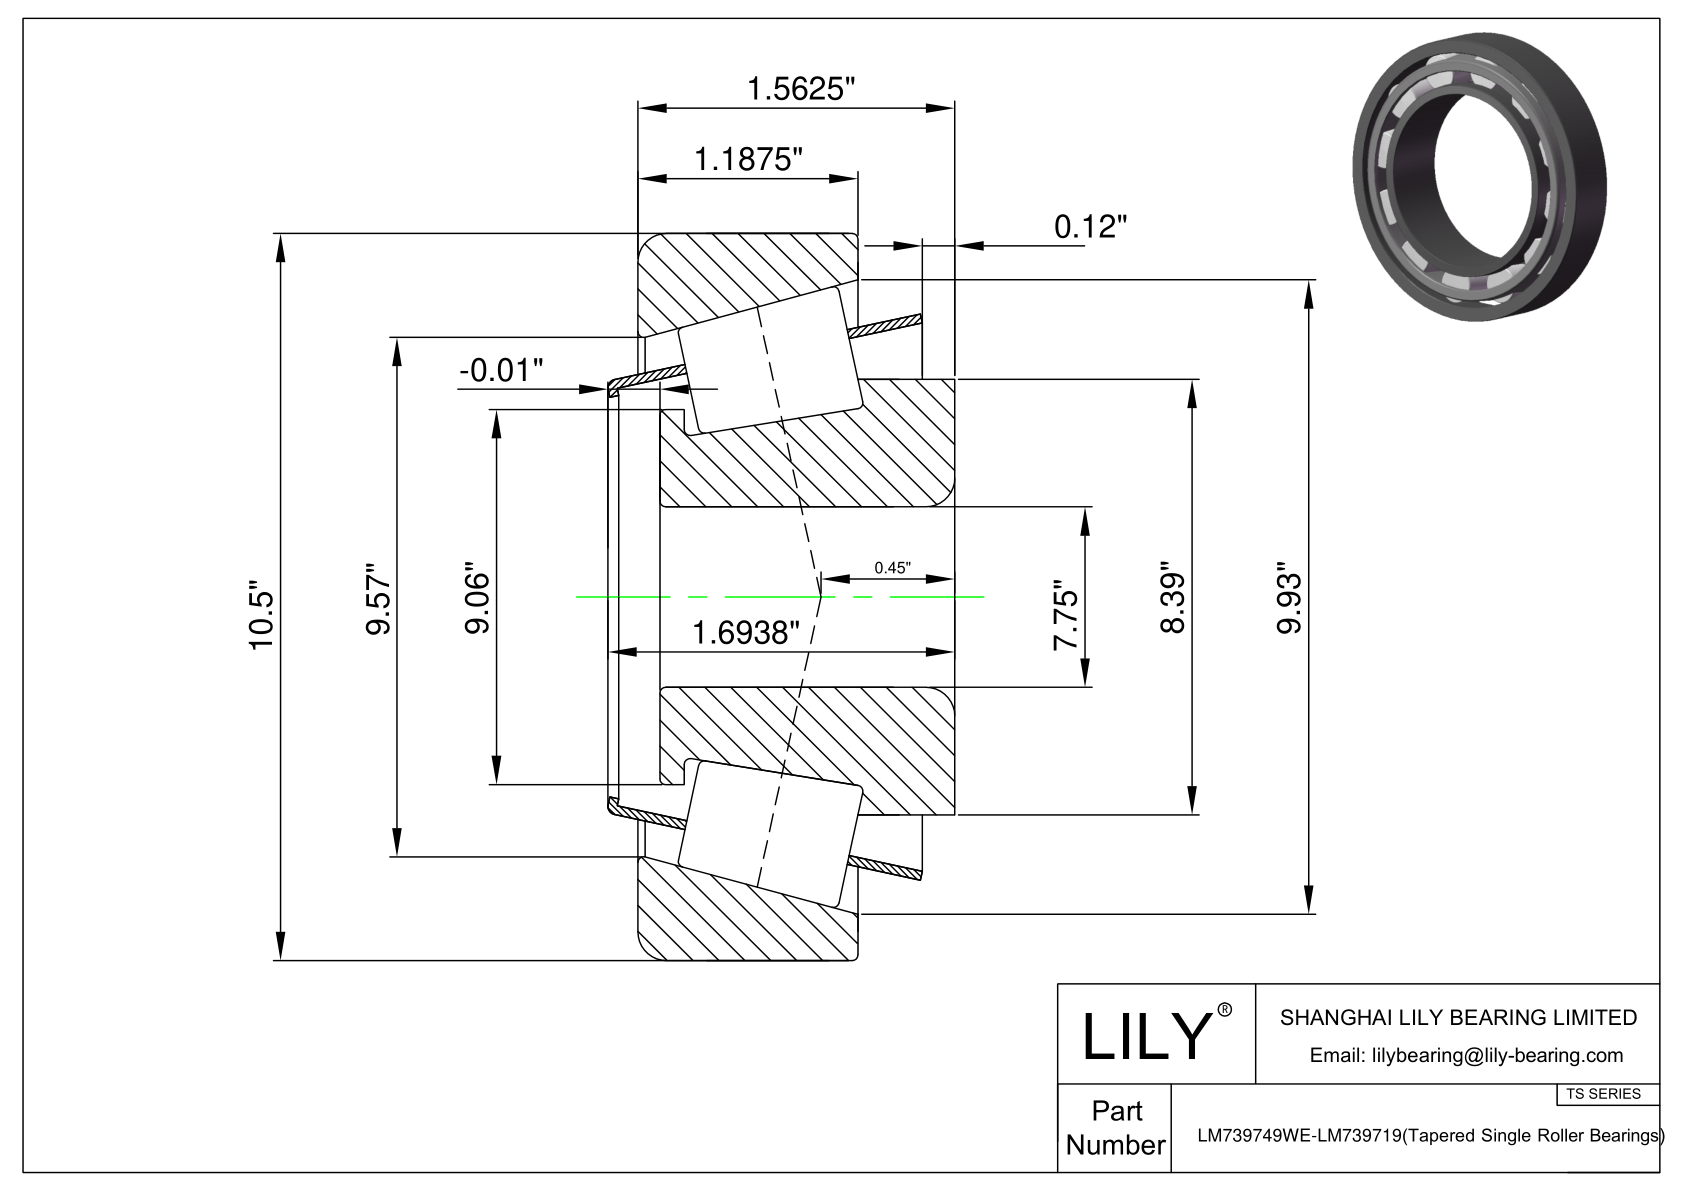 LM739749WE-LM739719 TS (Tapered Single Roller Bearings) (Imperial) cad drawing